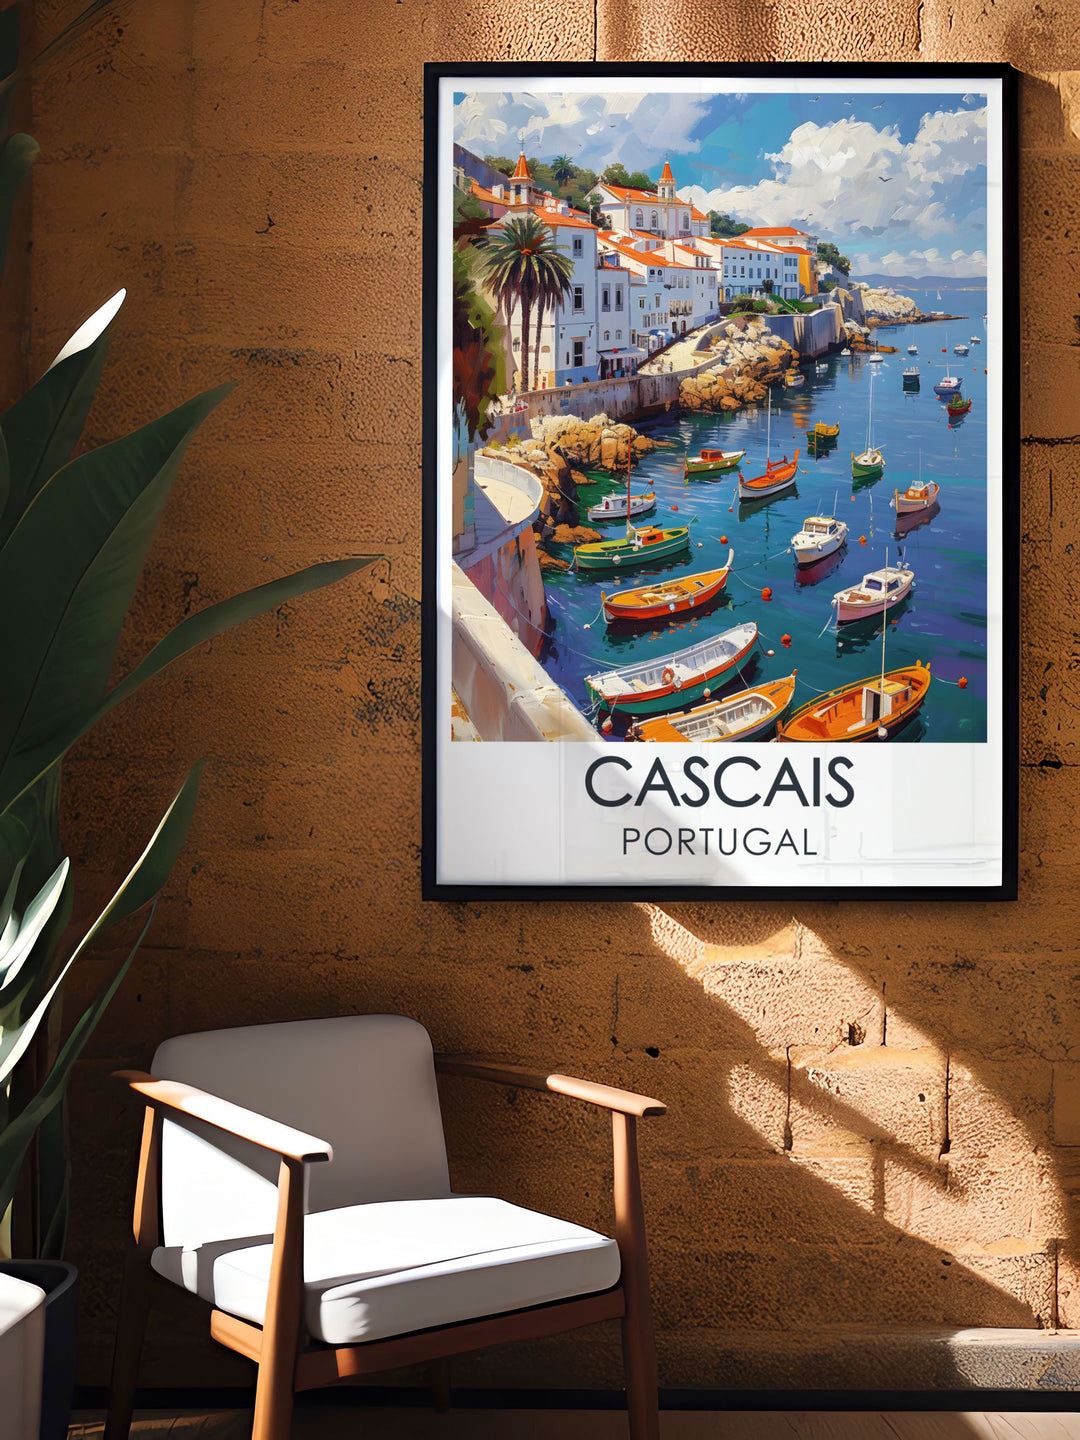 The lively Cascais Marina is beautifully depicted in this travel poster, showcasing its elegant yachts and waterfront restaurants. Bring a piece of Portugals coastal elegance into your living space with this exquisite artwork.